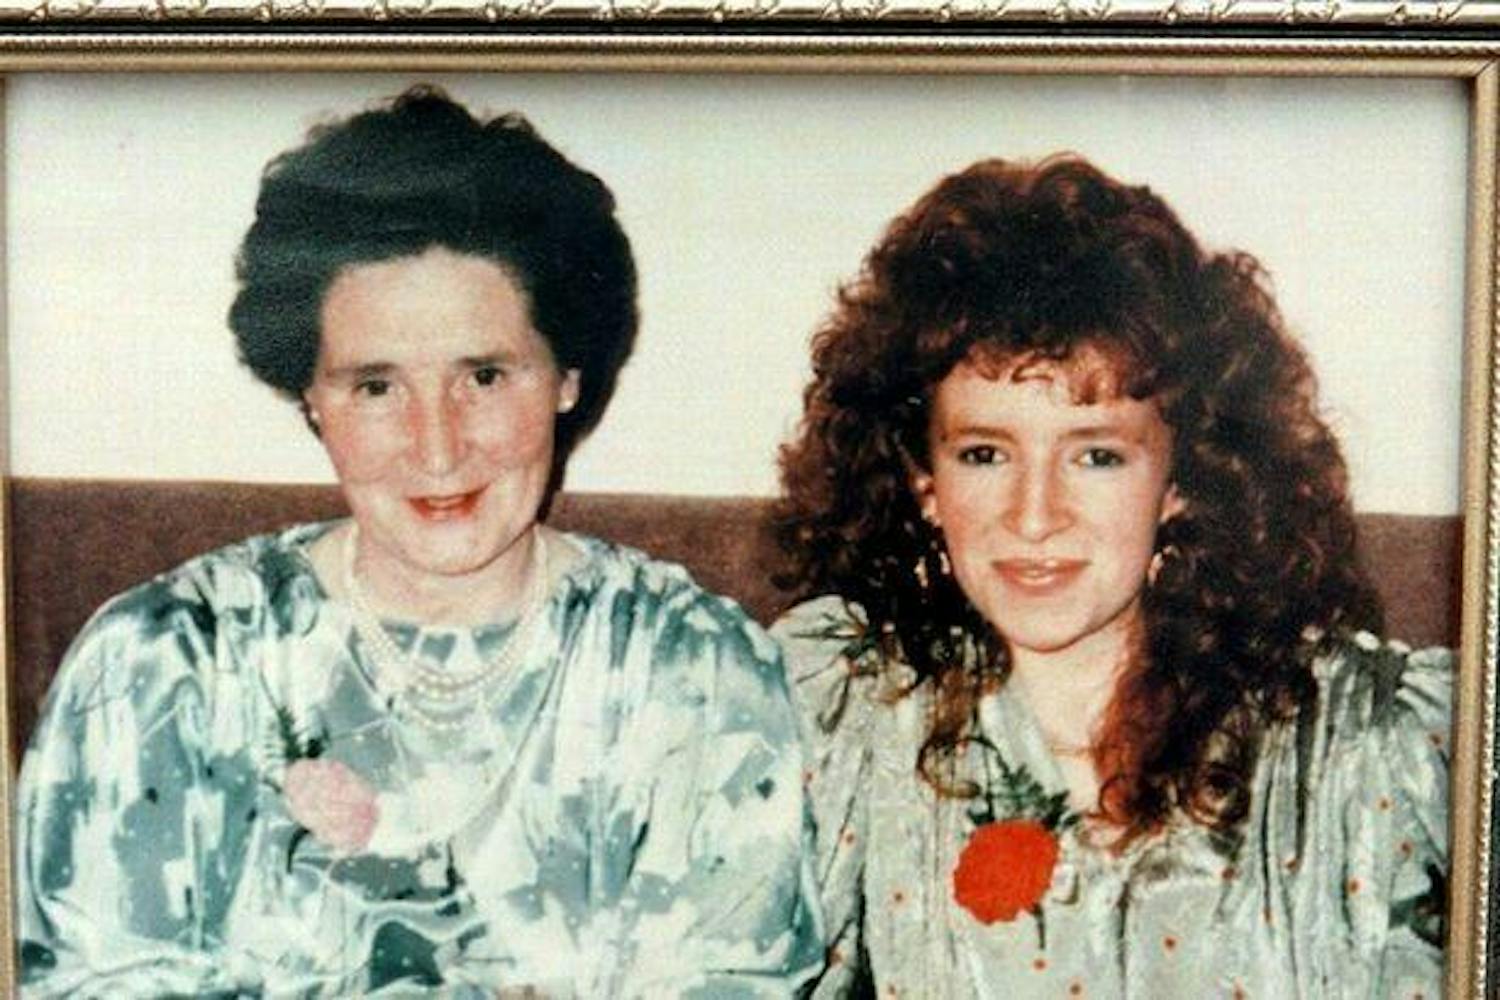 98 - A Question of Disorder: The murders of Anne & Annie Gillespie